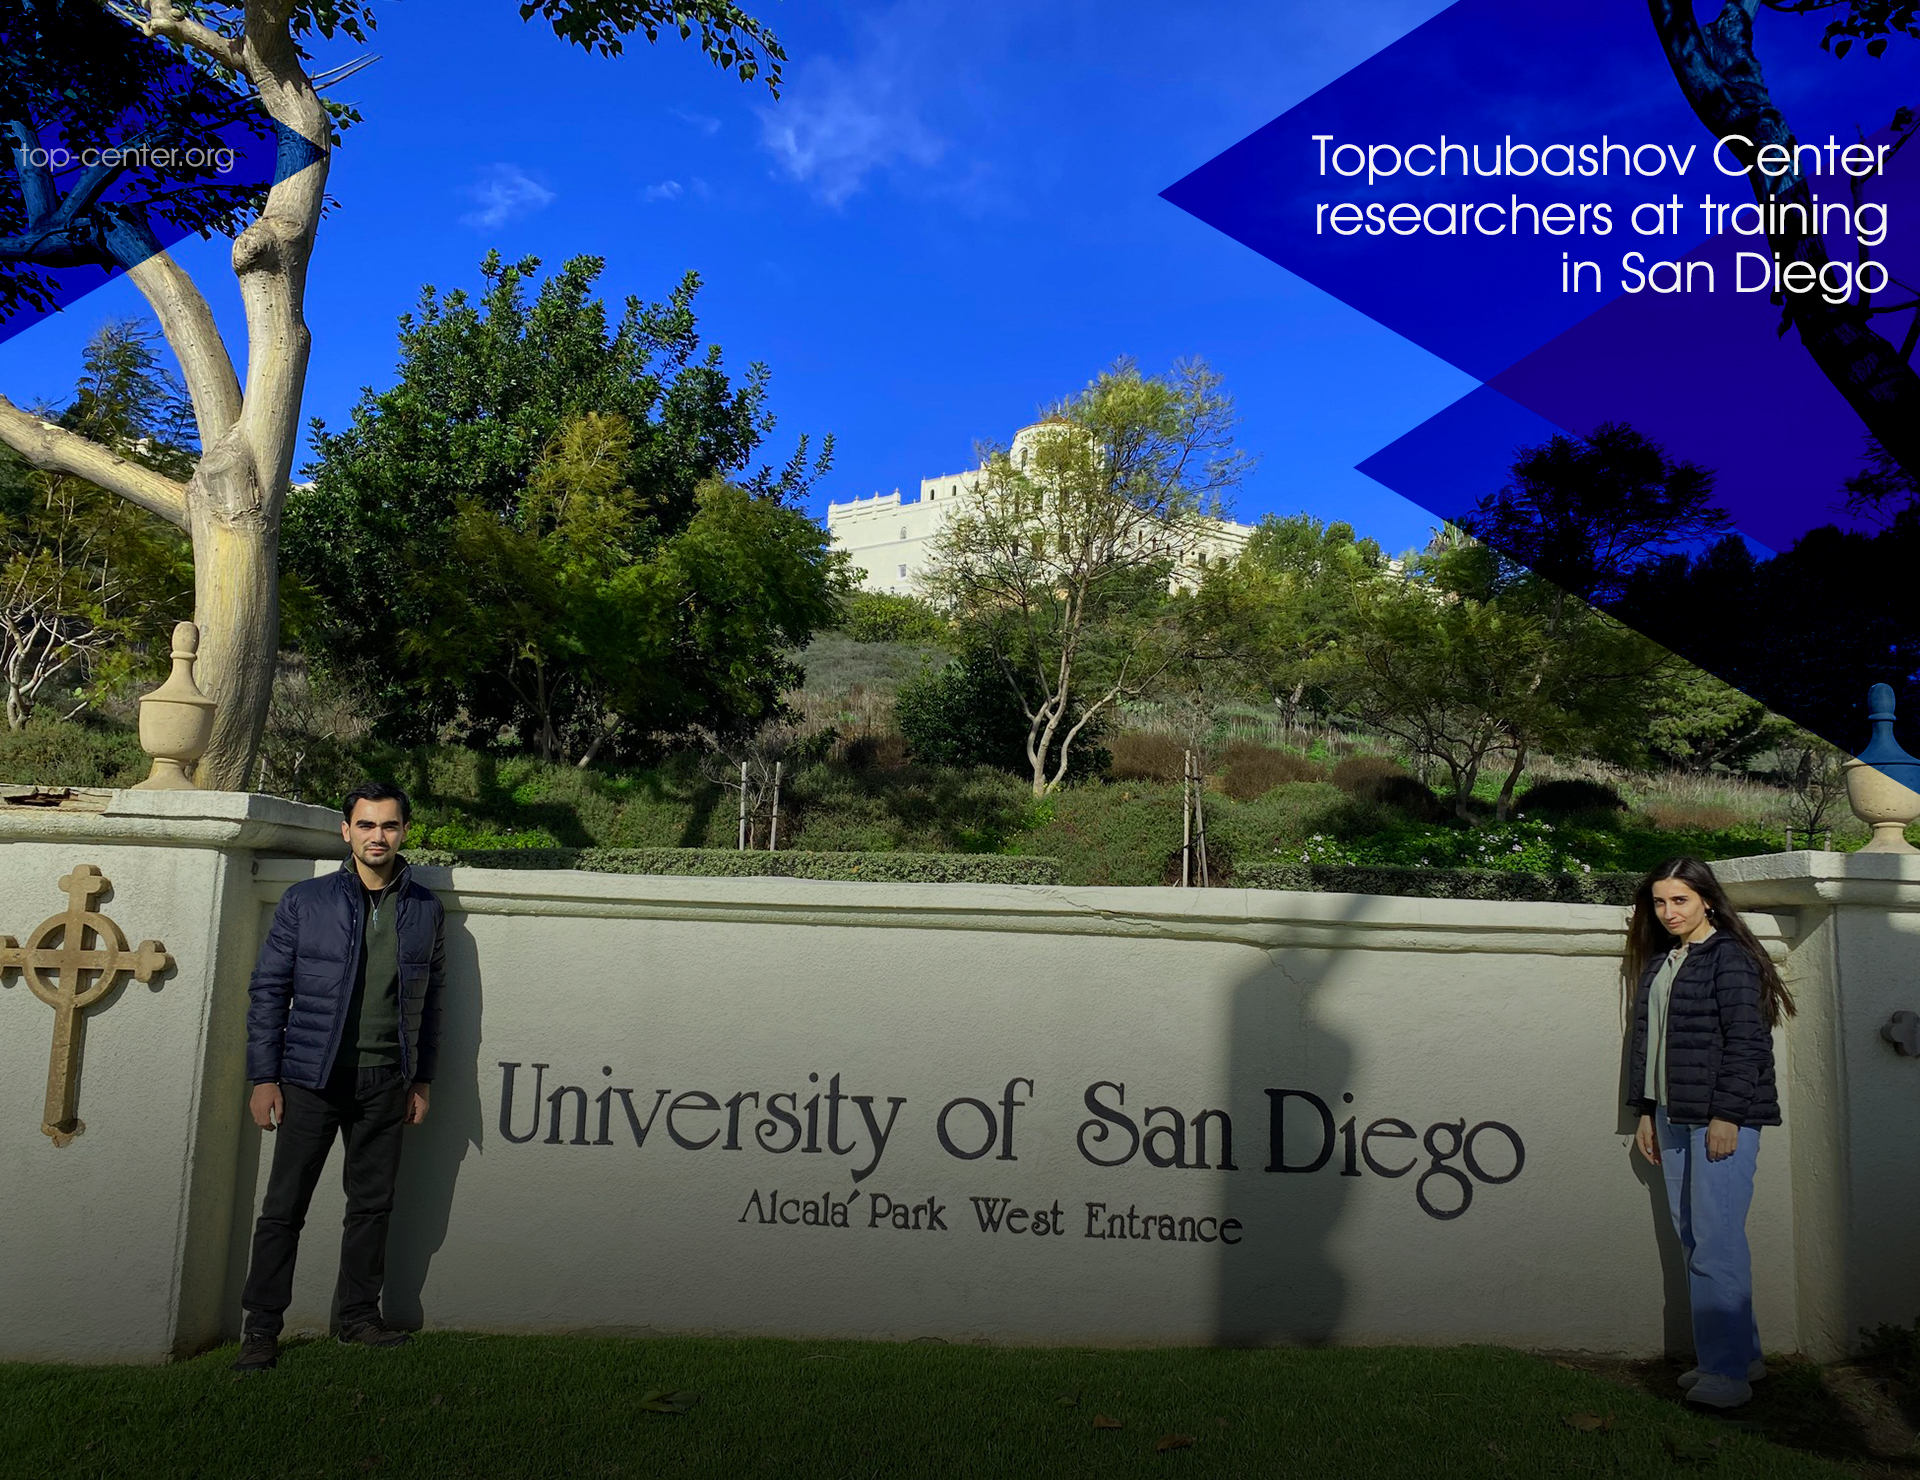 Topchubashov Center researchers at training in San Diego